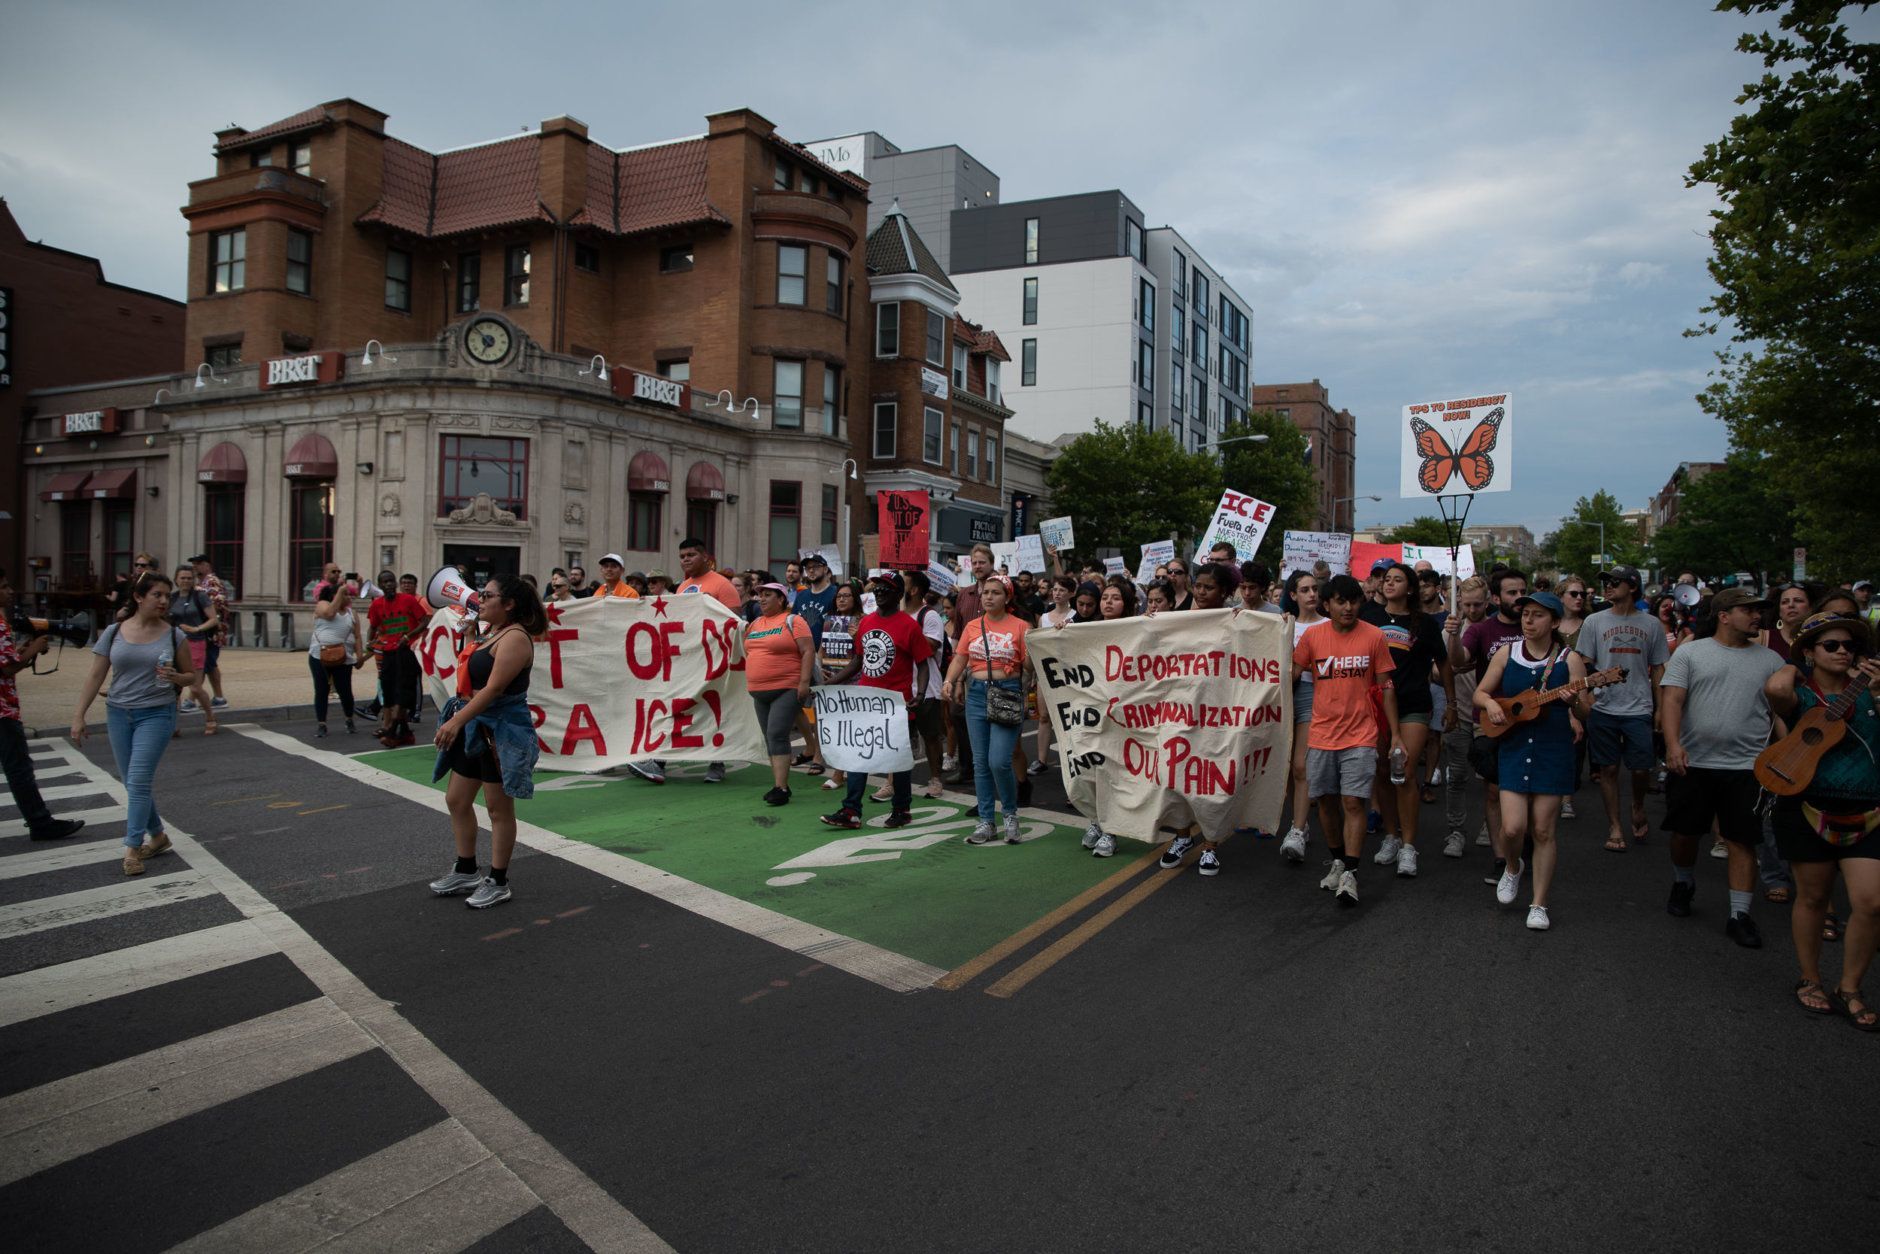 D.C. immigrant advocacy groups and their allies rallied in Columbia Heights and Adams Morgan on June 29, 2019, demanding Mayor Muriel Bowser and the D.C. Council enforce the city's status as a "sanctuary city" and not cooperate with federal law enforcement in detaining undocumented migrants. (WTOP/Alejandro Alvarez)